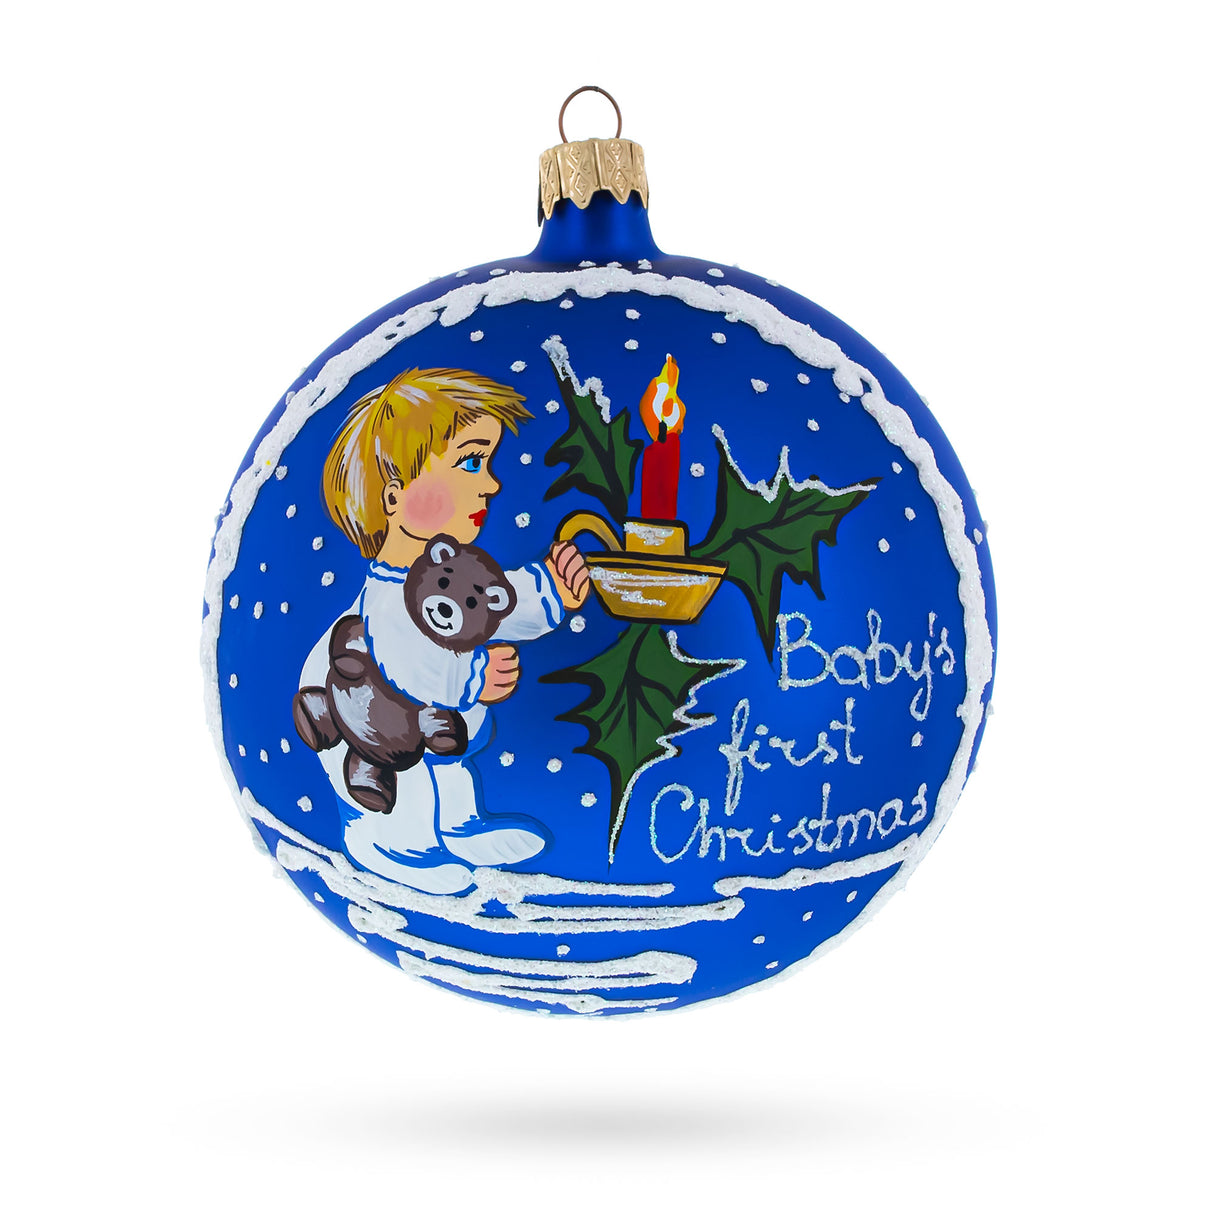 Glass Boy Cuddling Teddy Bear Blown Glass Ball Baby's First Christmas Ornament 4 Inches in Blue color Round